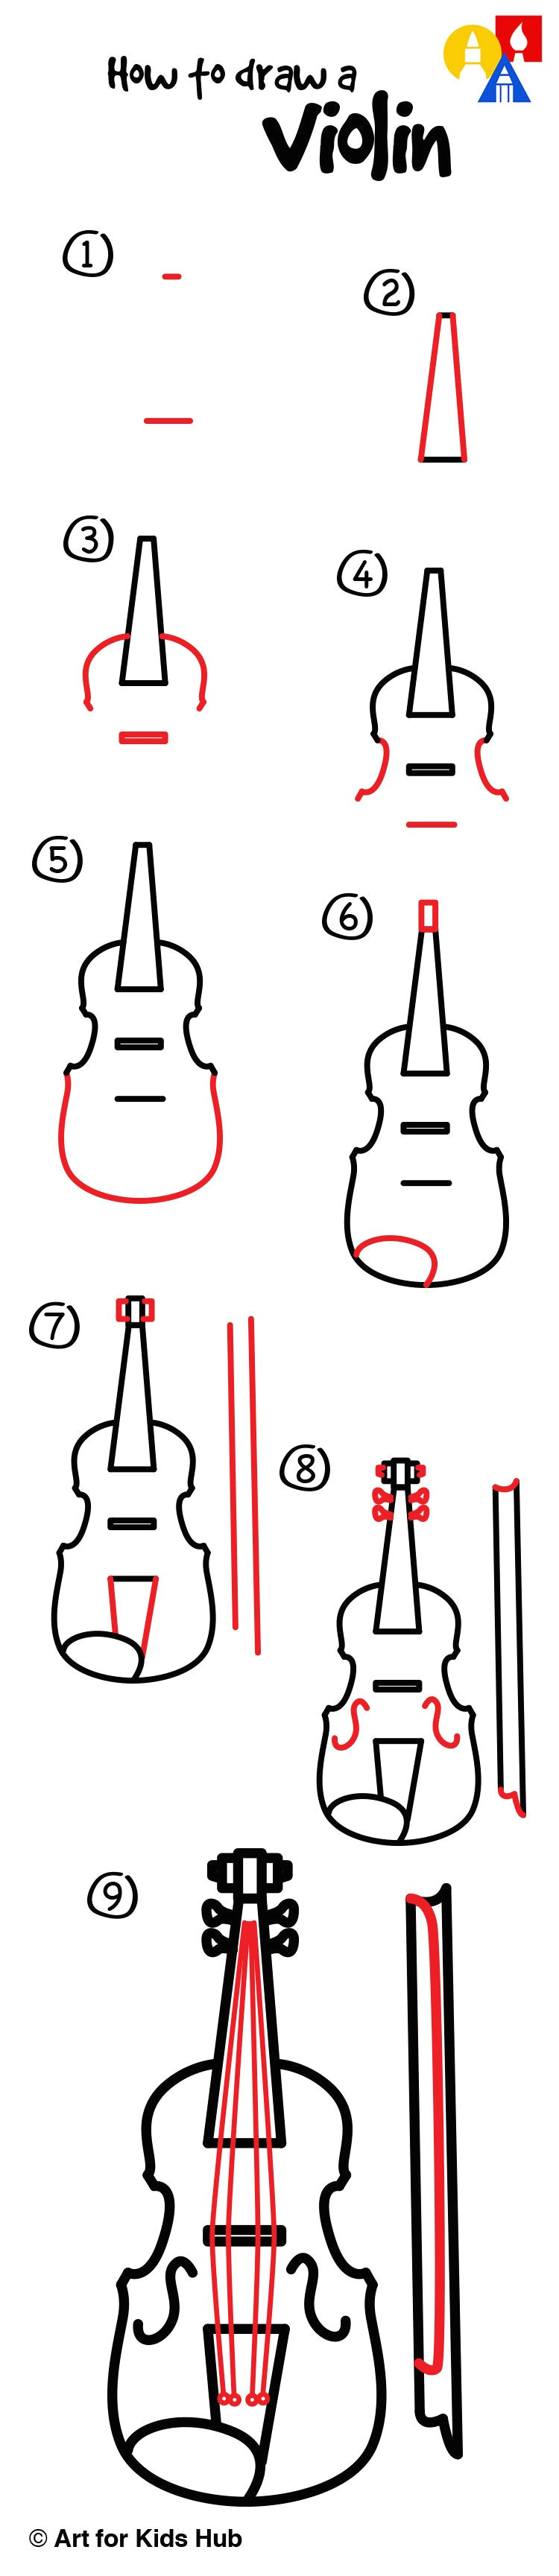 how to draw a violin